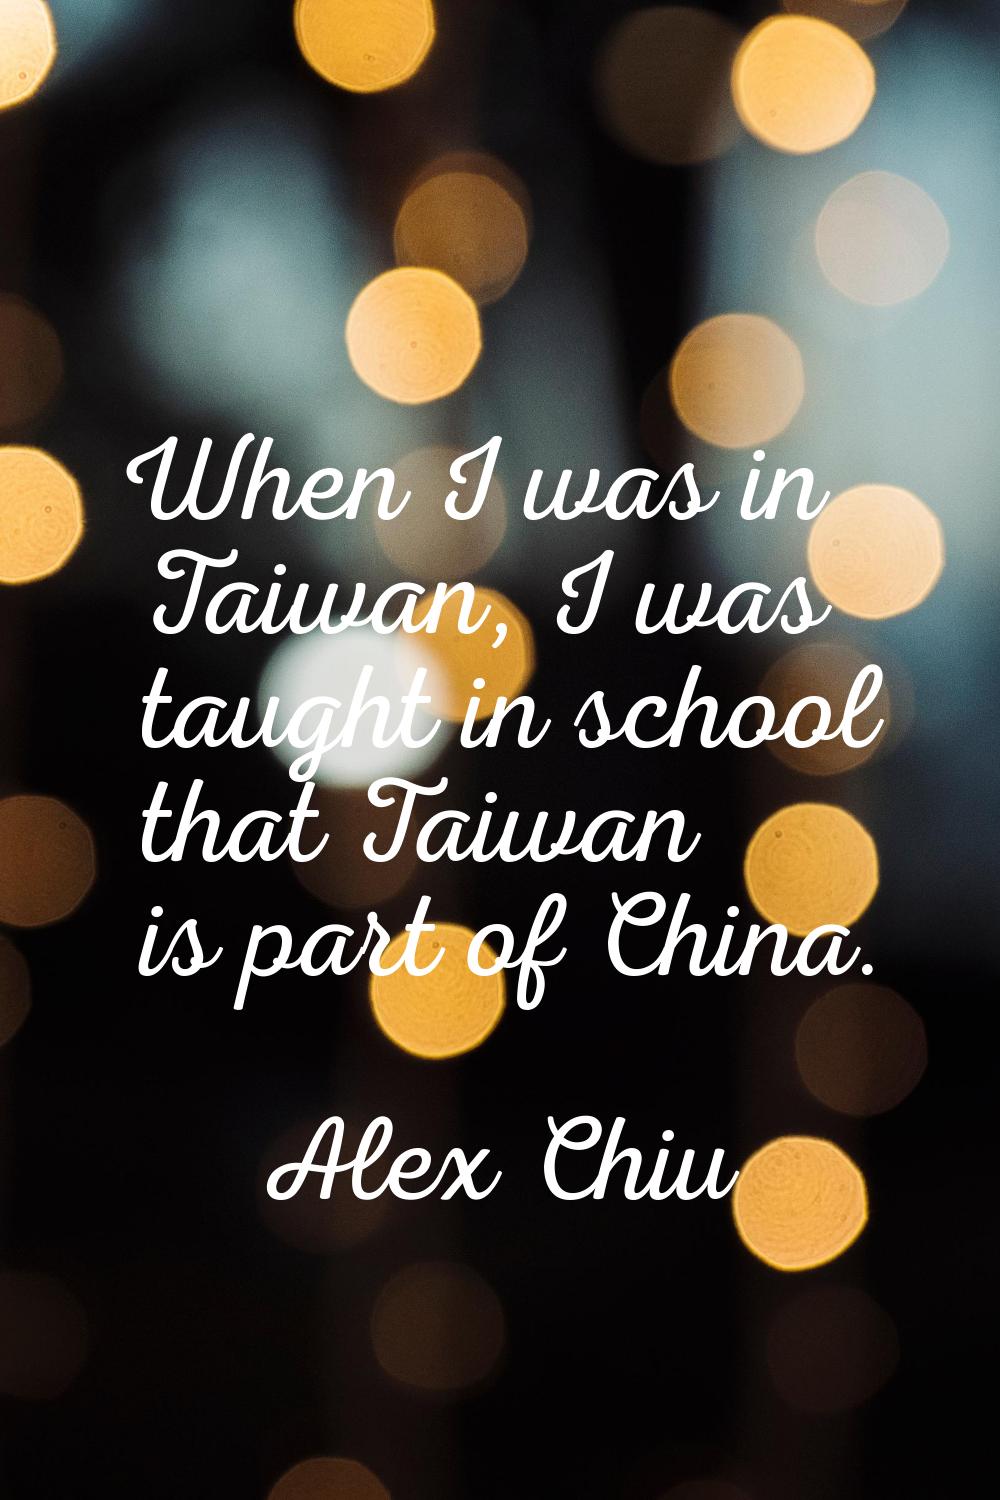 When I was in Taiwan, I was taught in school that Taiwan is part of China.